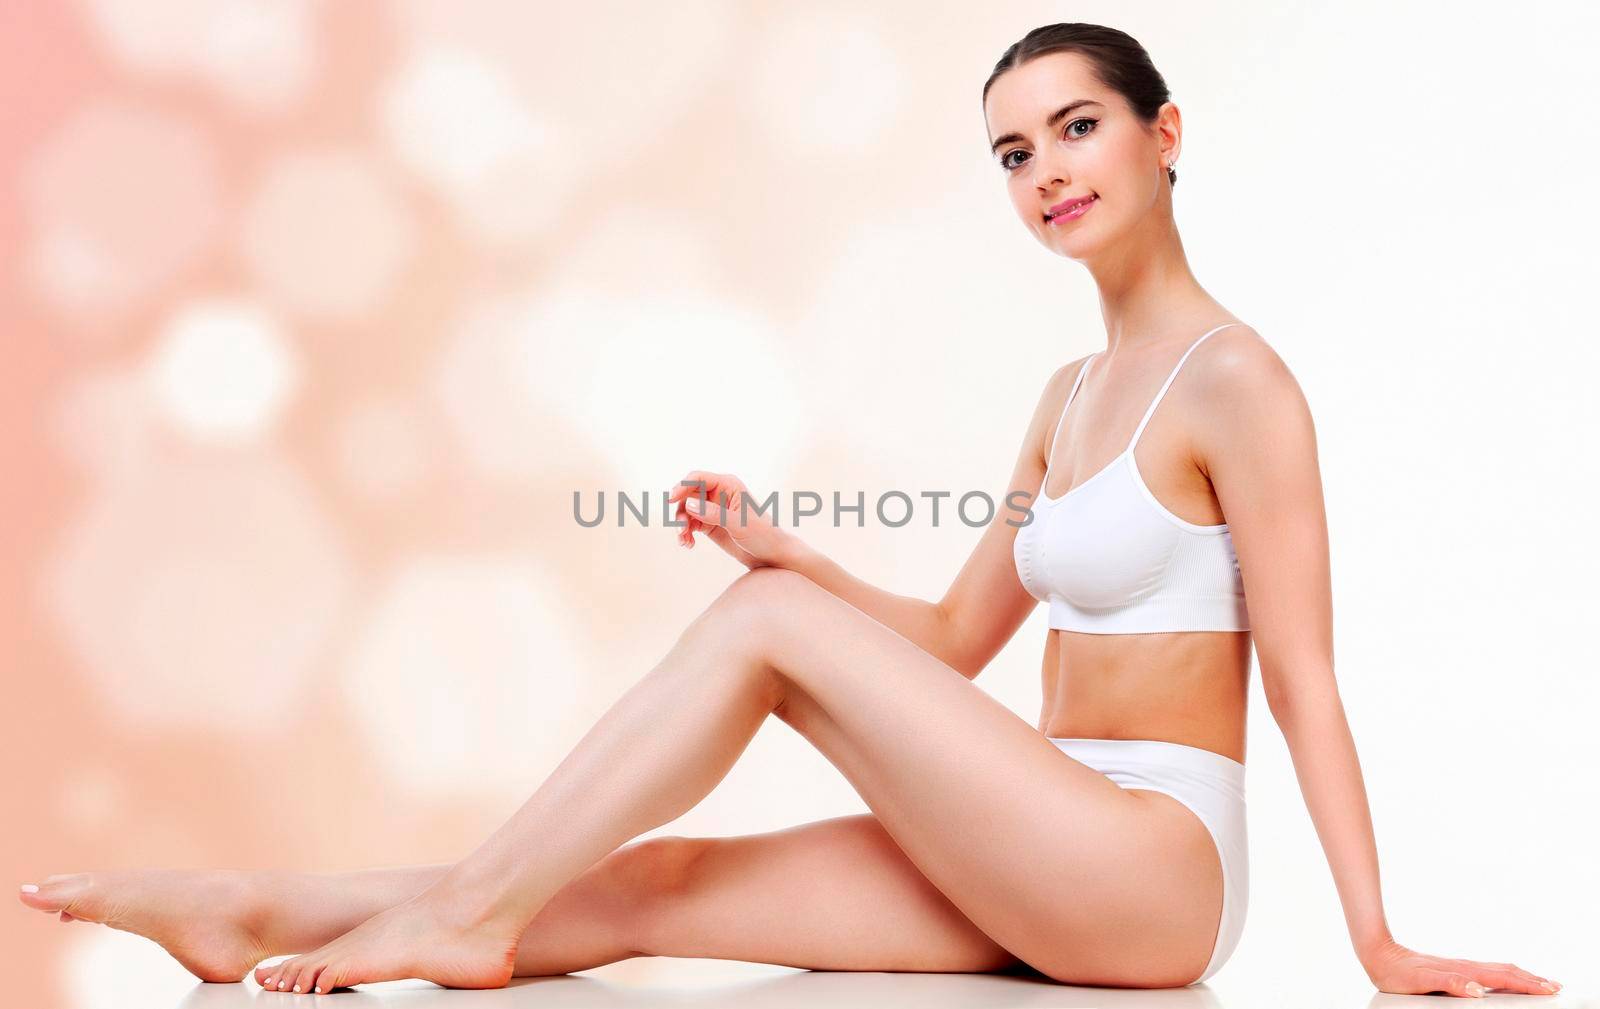 Pretty woman with slim beautiful body sitting against an abstract background with circles and copyspace